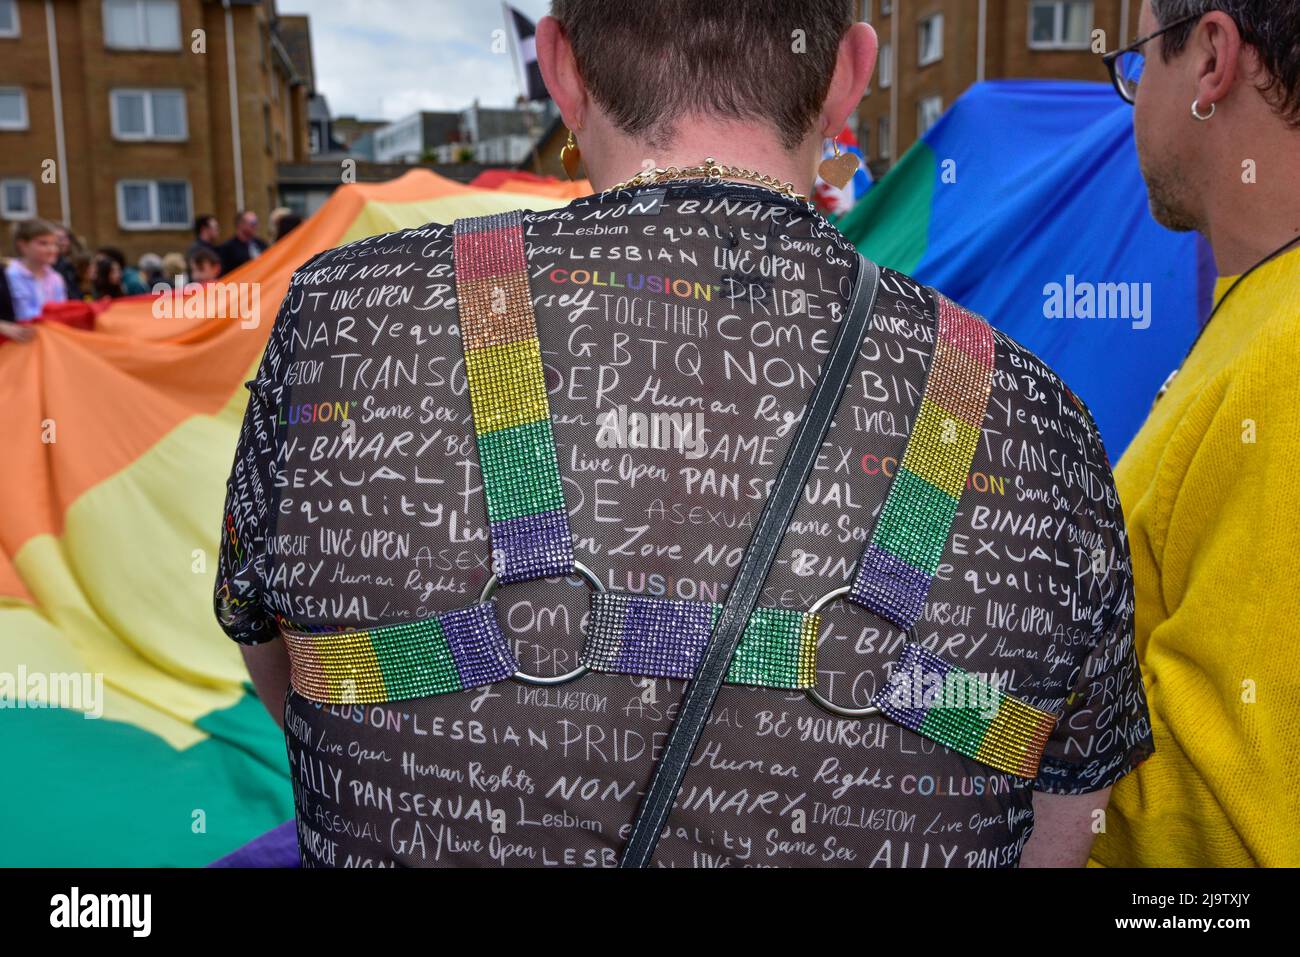 The T shirt worn by a participant in the vibrant colourful Cornwall Prides Pride parade in Newquay Town centre in the UK. Stock Photo